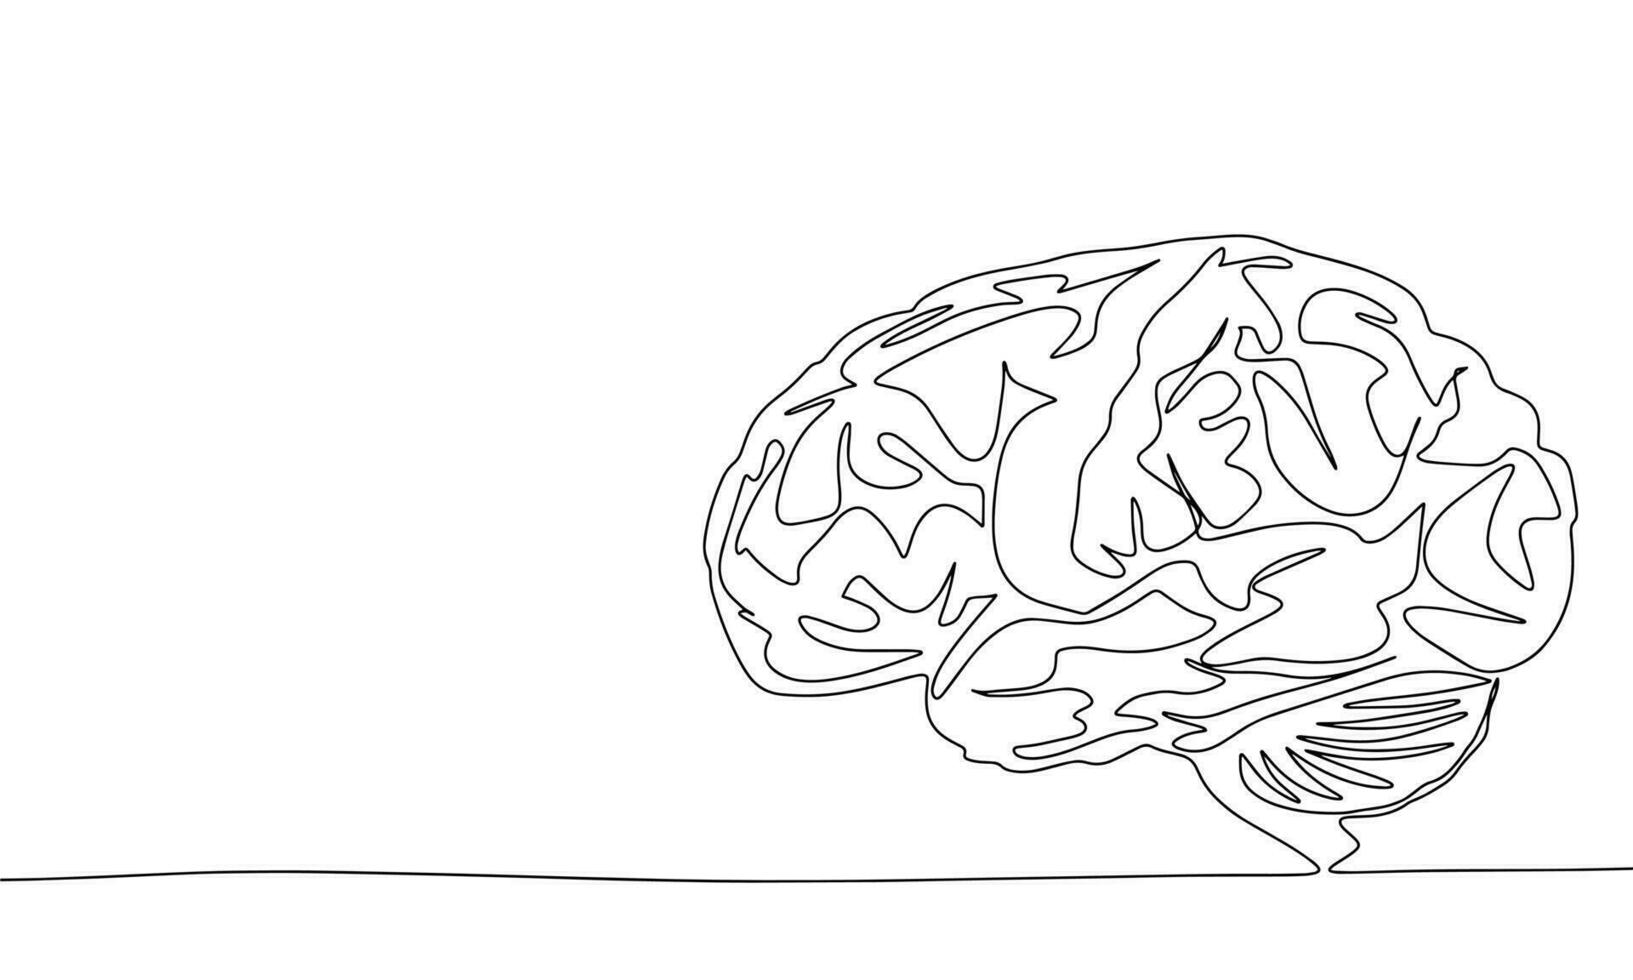 One line continuous brain. Line art health banner concept. Hand drawn, outline vector illustration.